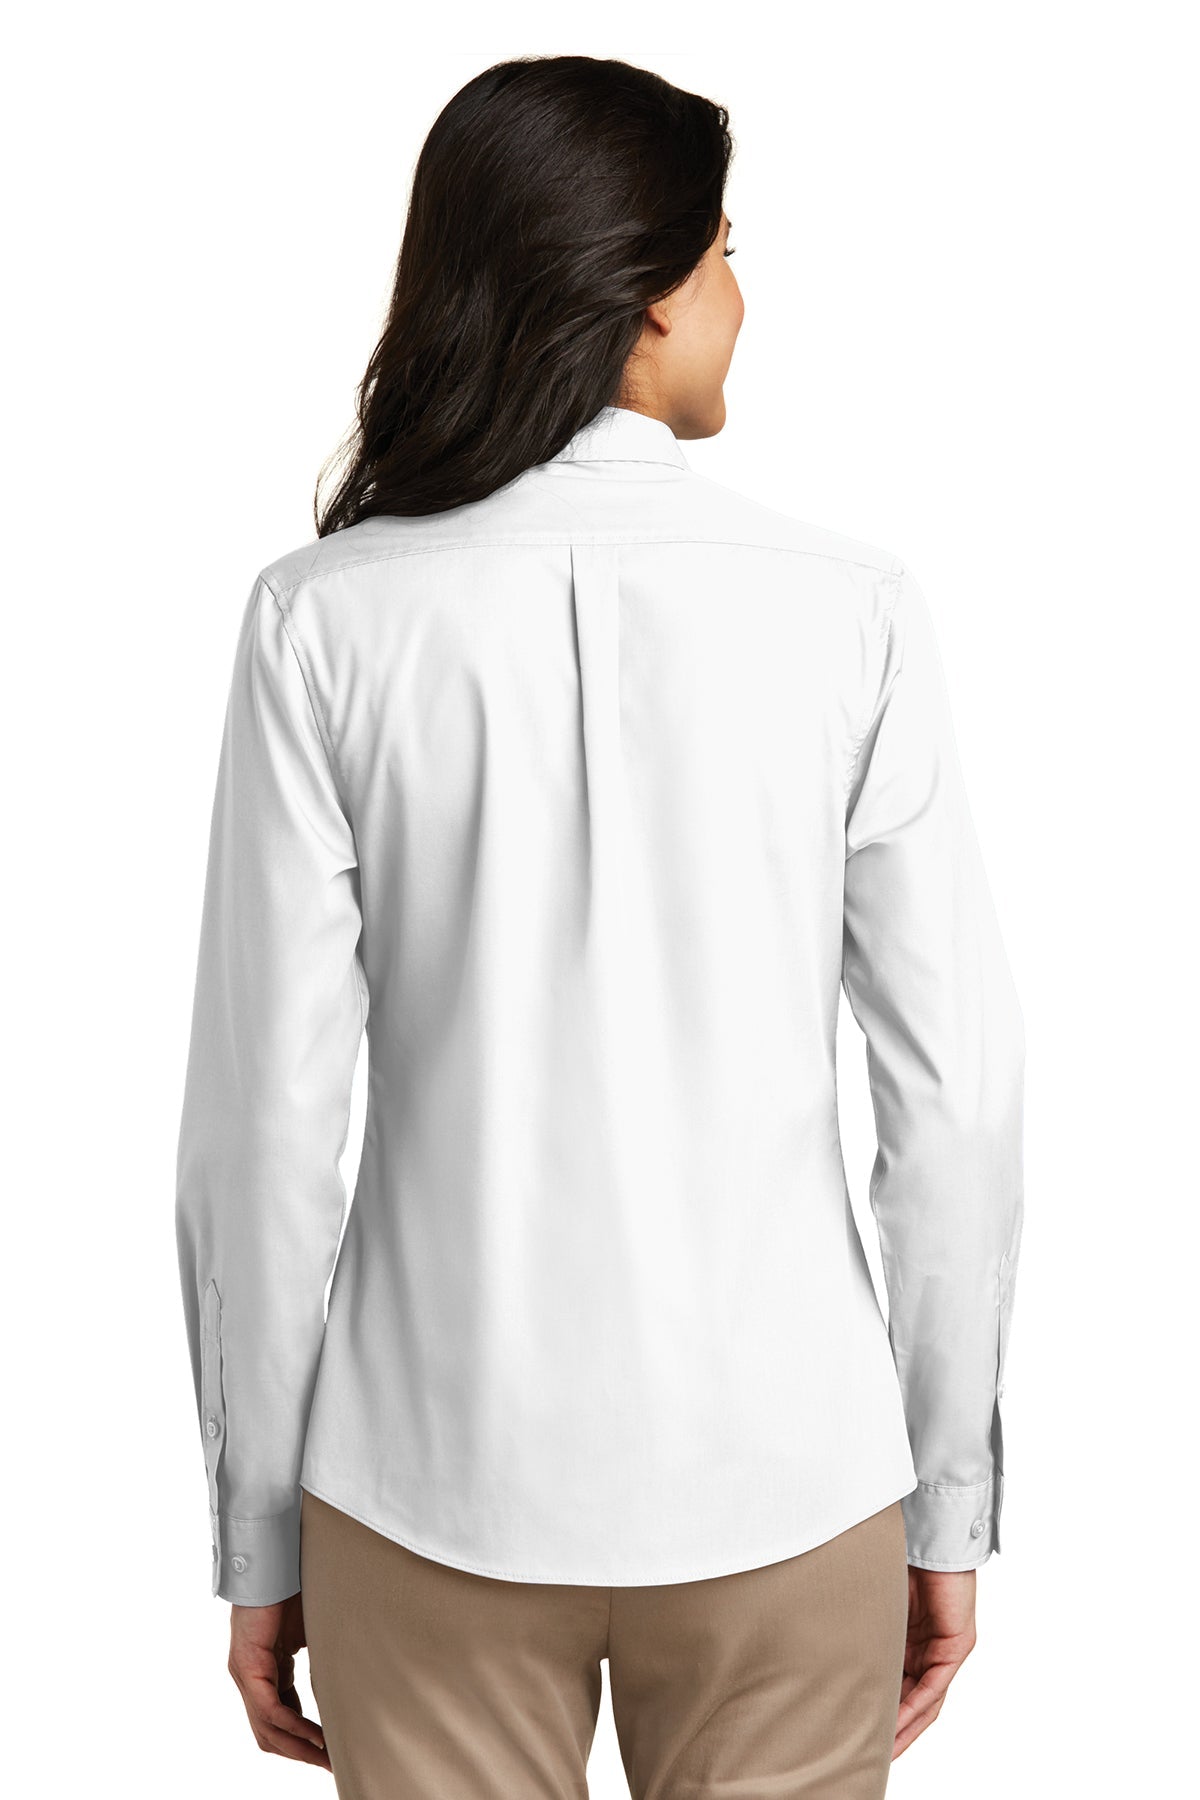 port authority_lw100 _white_company_logo_button downs